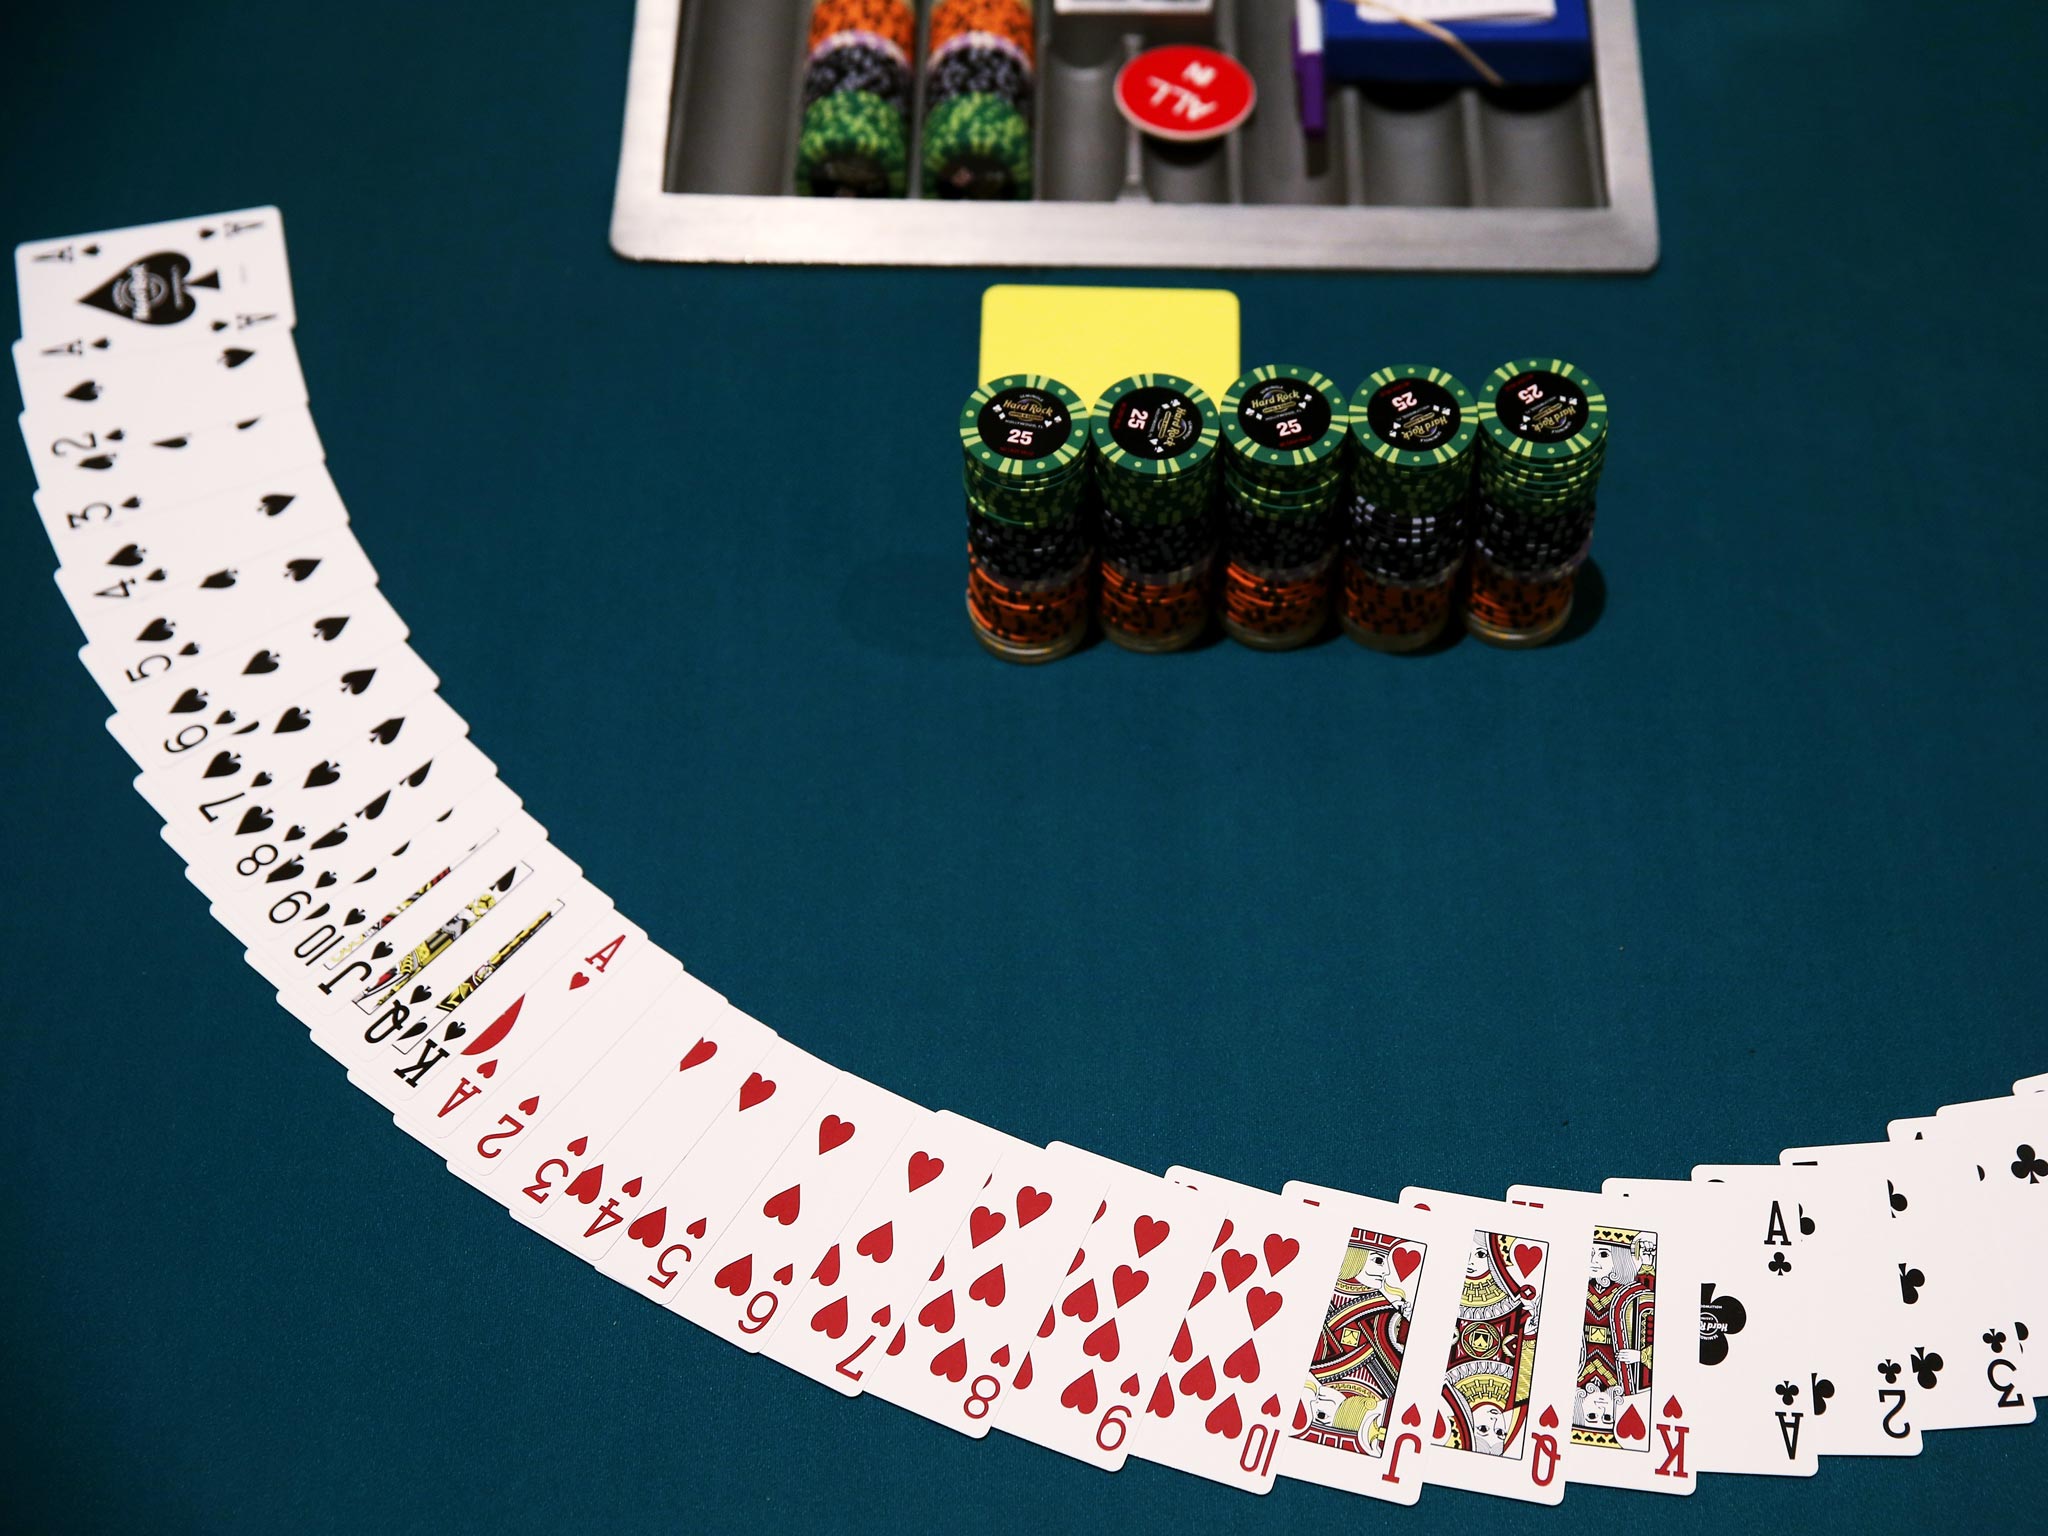 A study has identified a region of the brain that appears to play a critical role in making people more likely to gamble